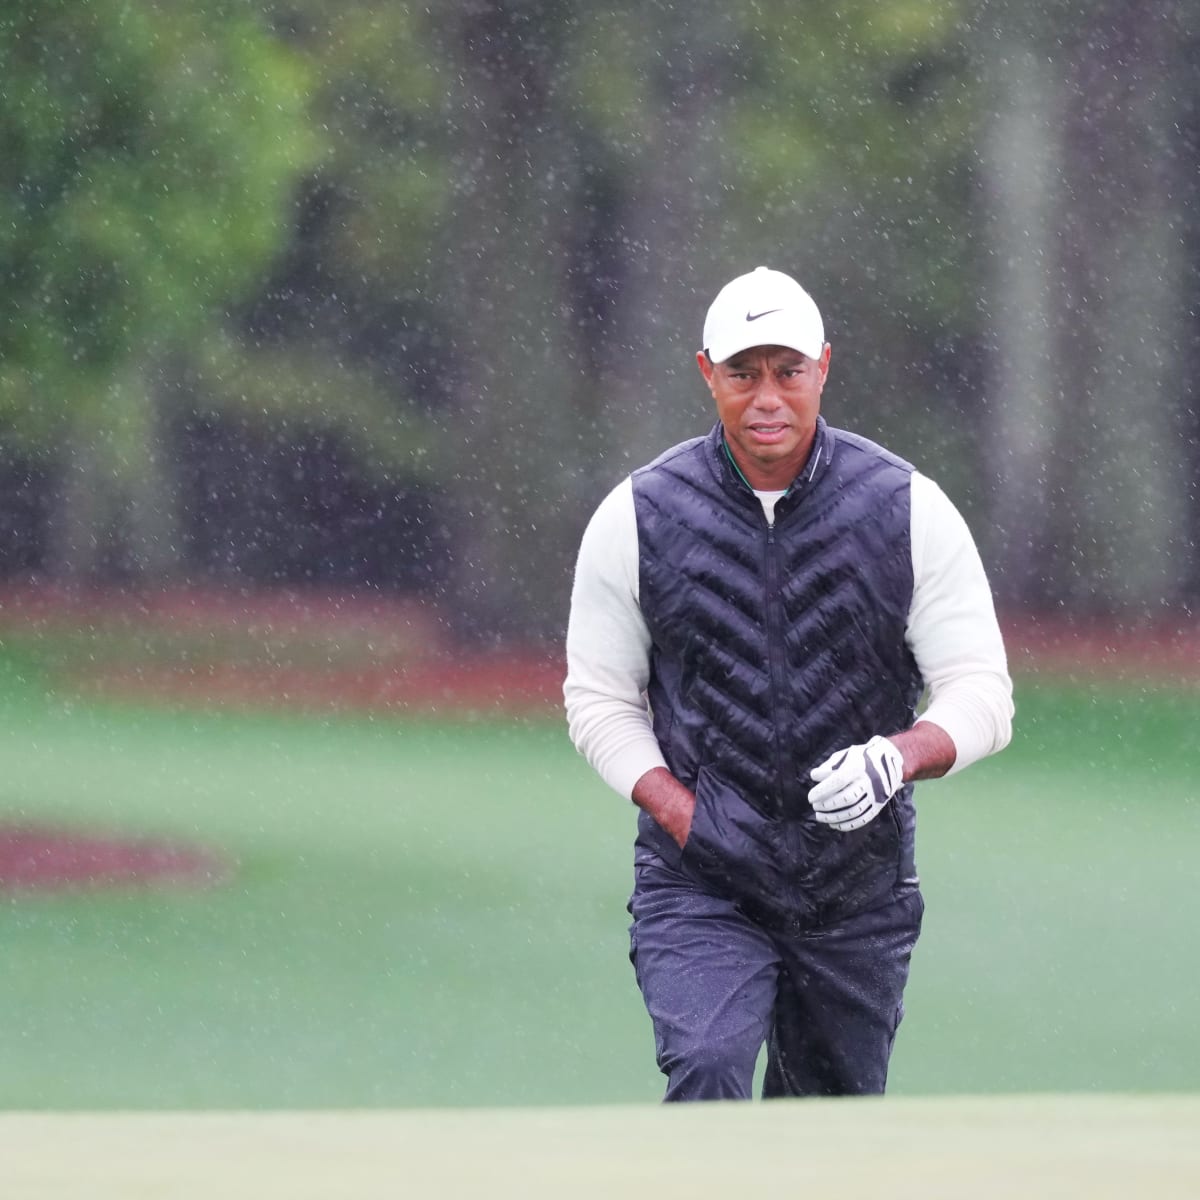 2023 Masters Tee Times: Who Are the LIV Golf Players Paired With